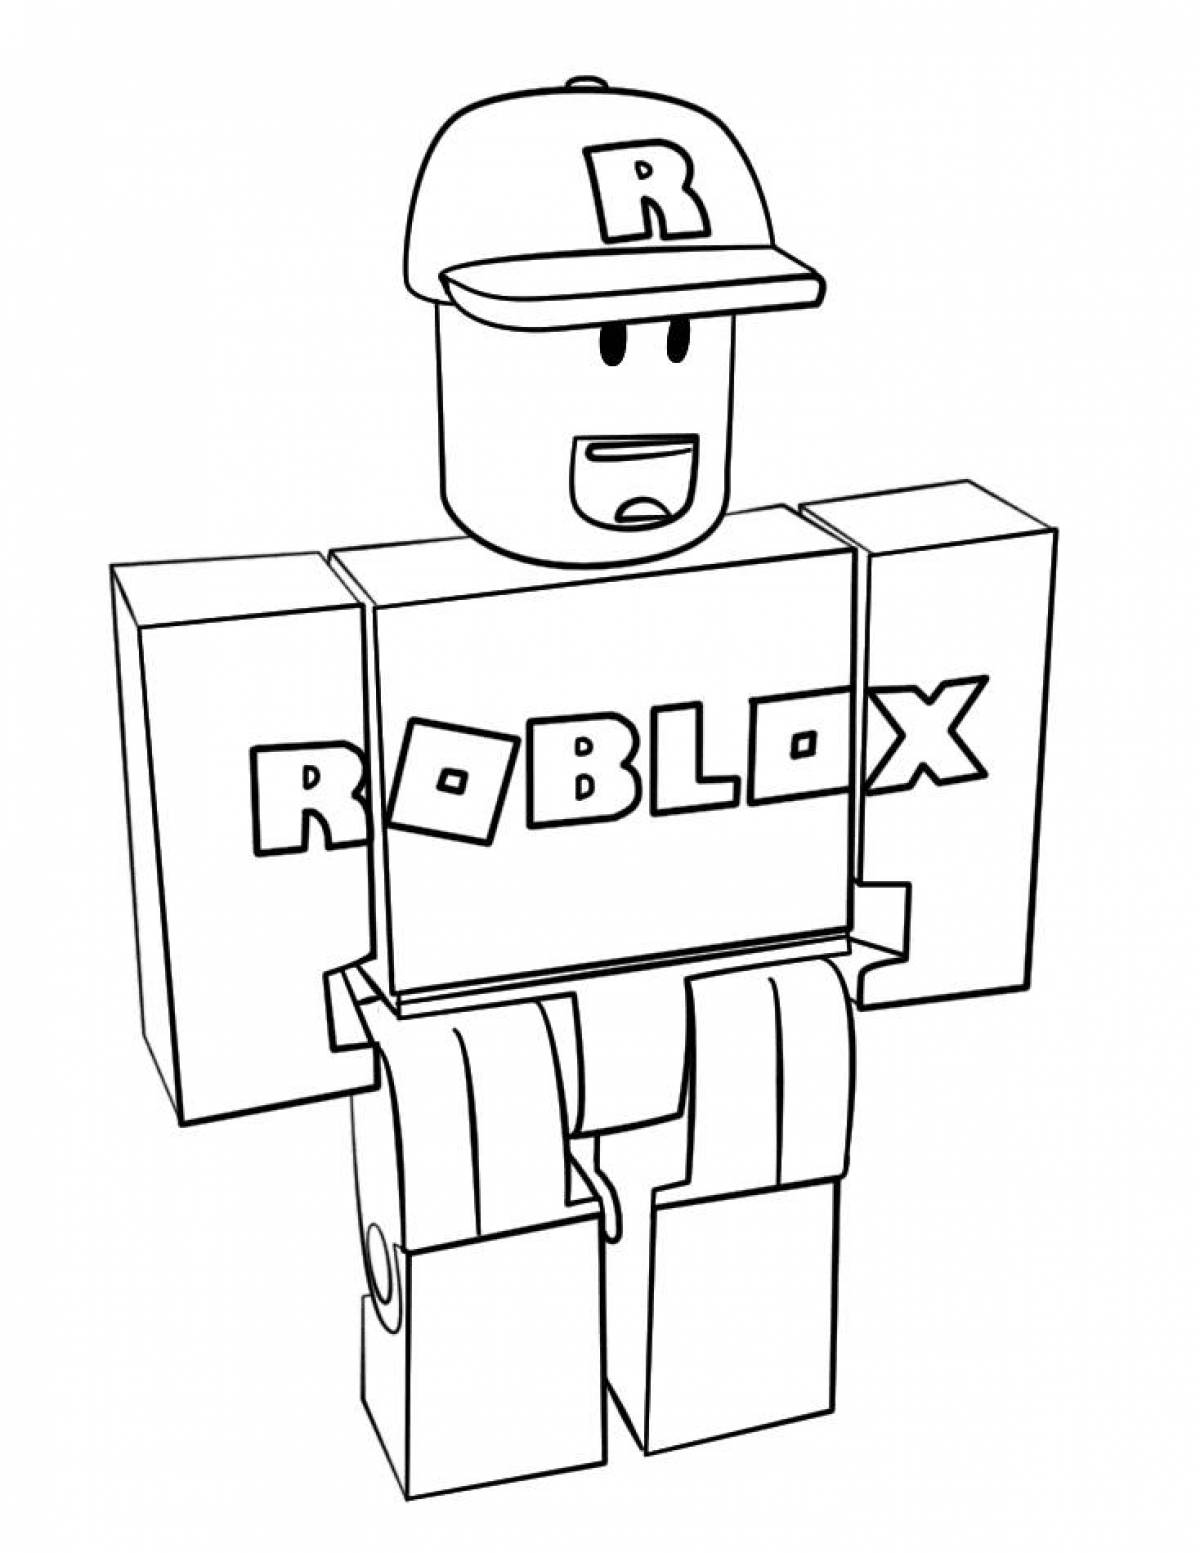 Exciting roblox doors coloring page